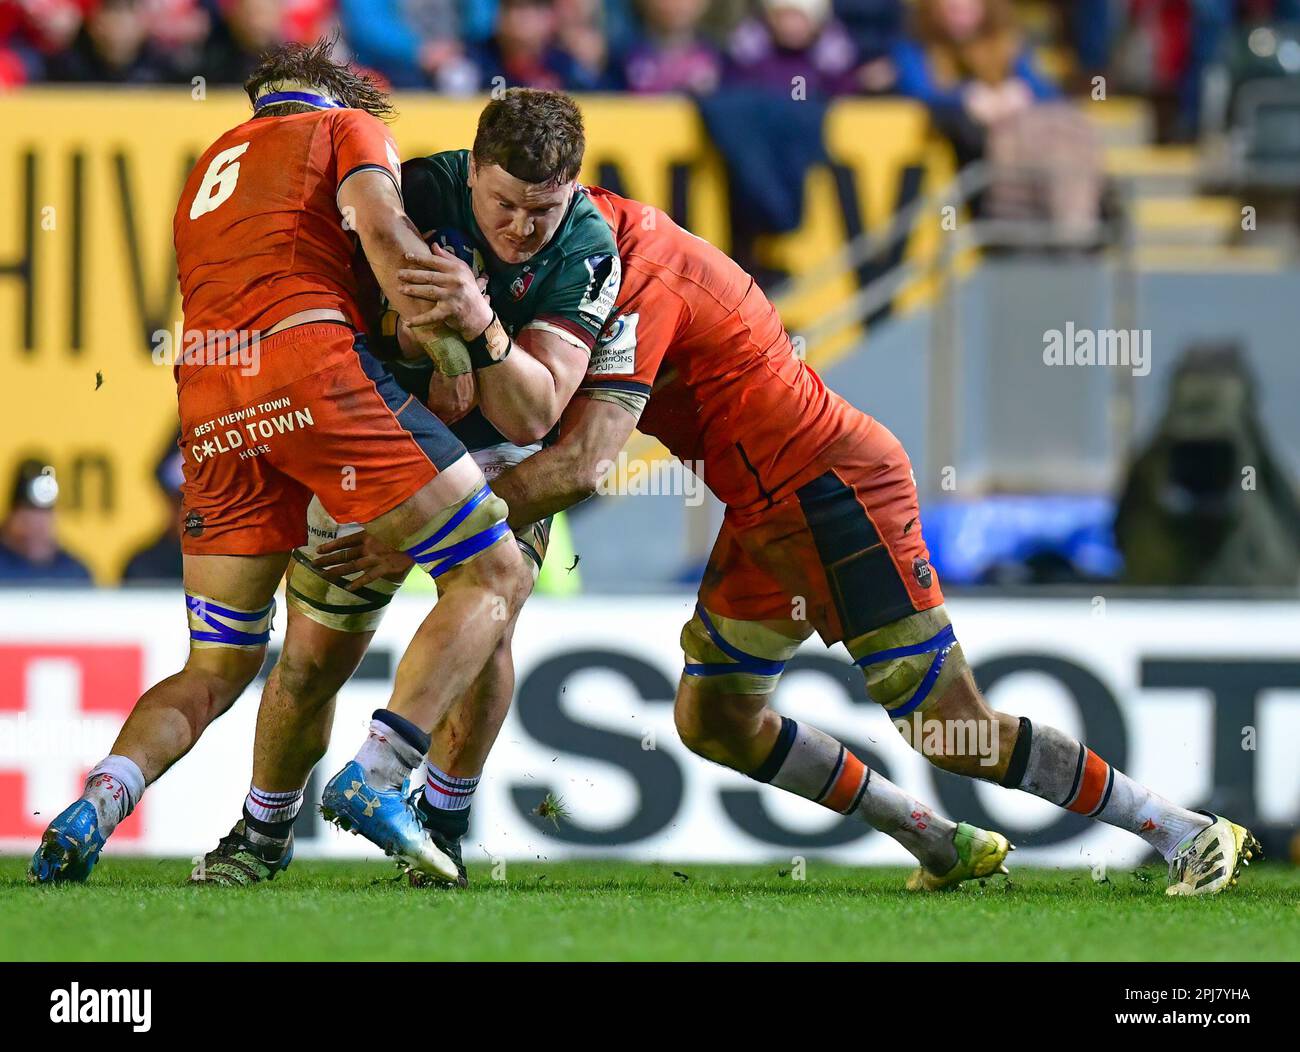 Jasper Weise (Leicester Tigers) - Leicester Tigers Rugby v Edinburgh Rugby Team at the Mattioli Stadium in Leicester, UK on 31 March 2023.  Jasper Weise (Leicester Tigers) tackled by Jamie Ritchie (Edinburgh) at the Mattioli Rugby Stadium, Leicester, Uk  Credit: Mark Dunn/Alamy Live News Stock Photo